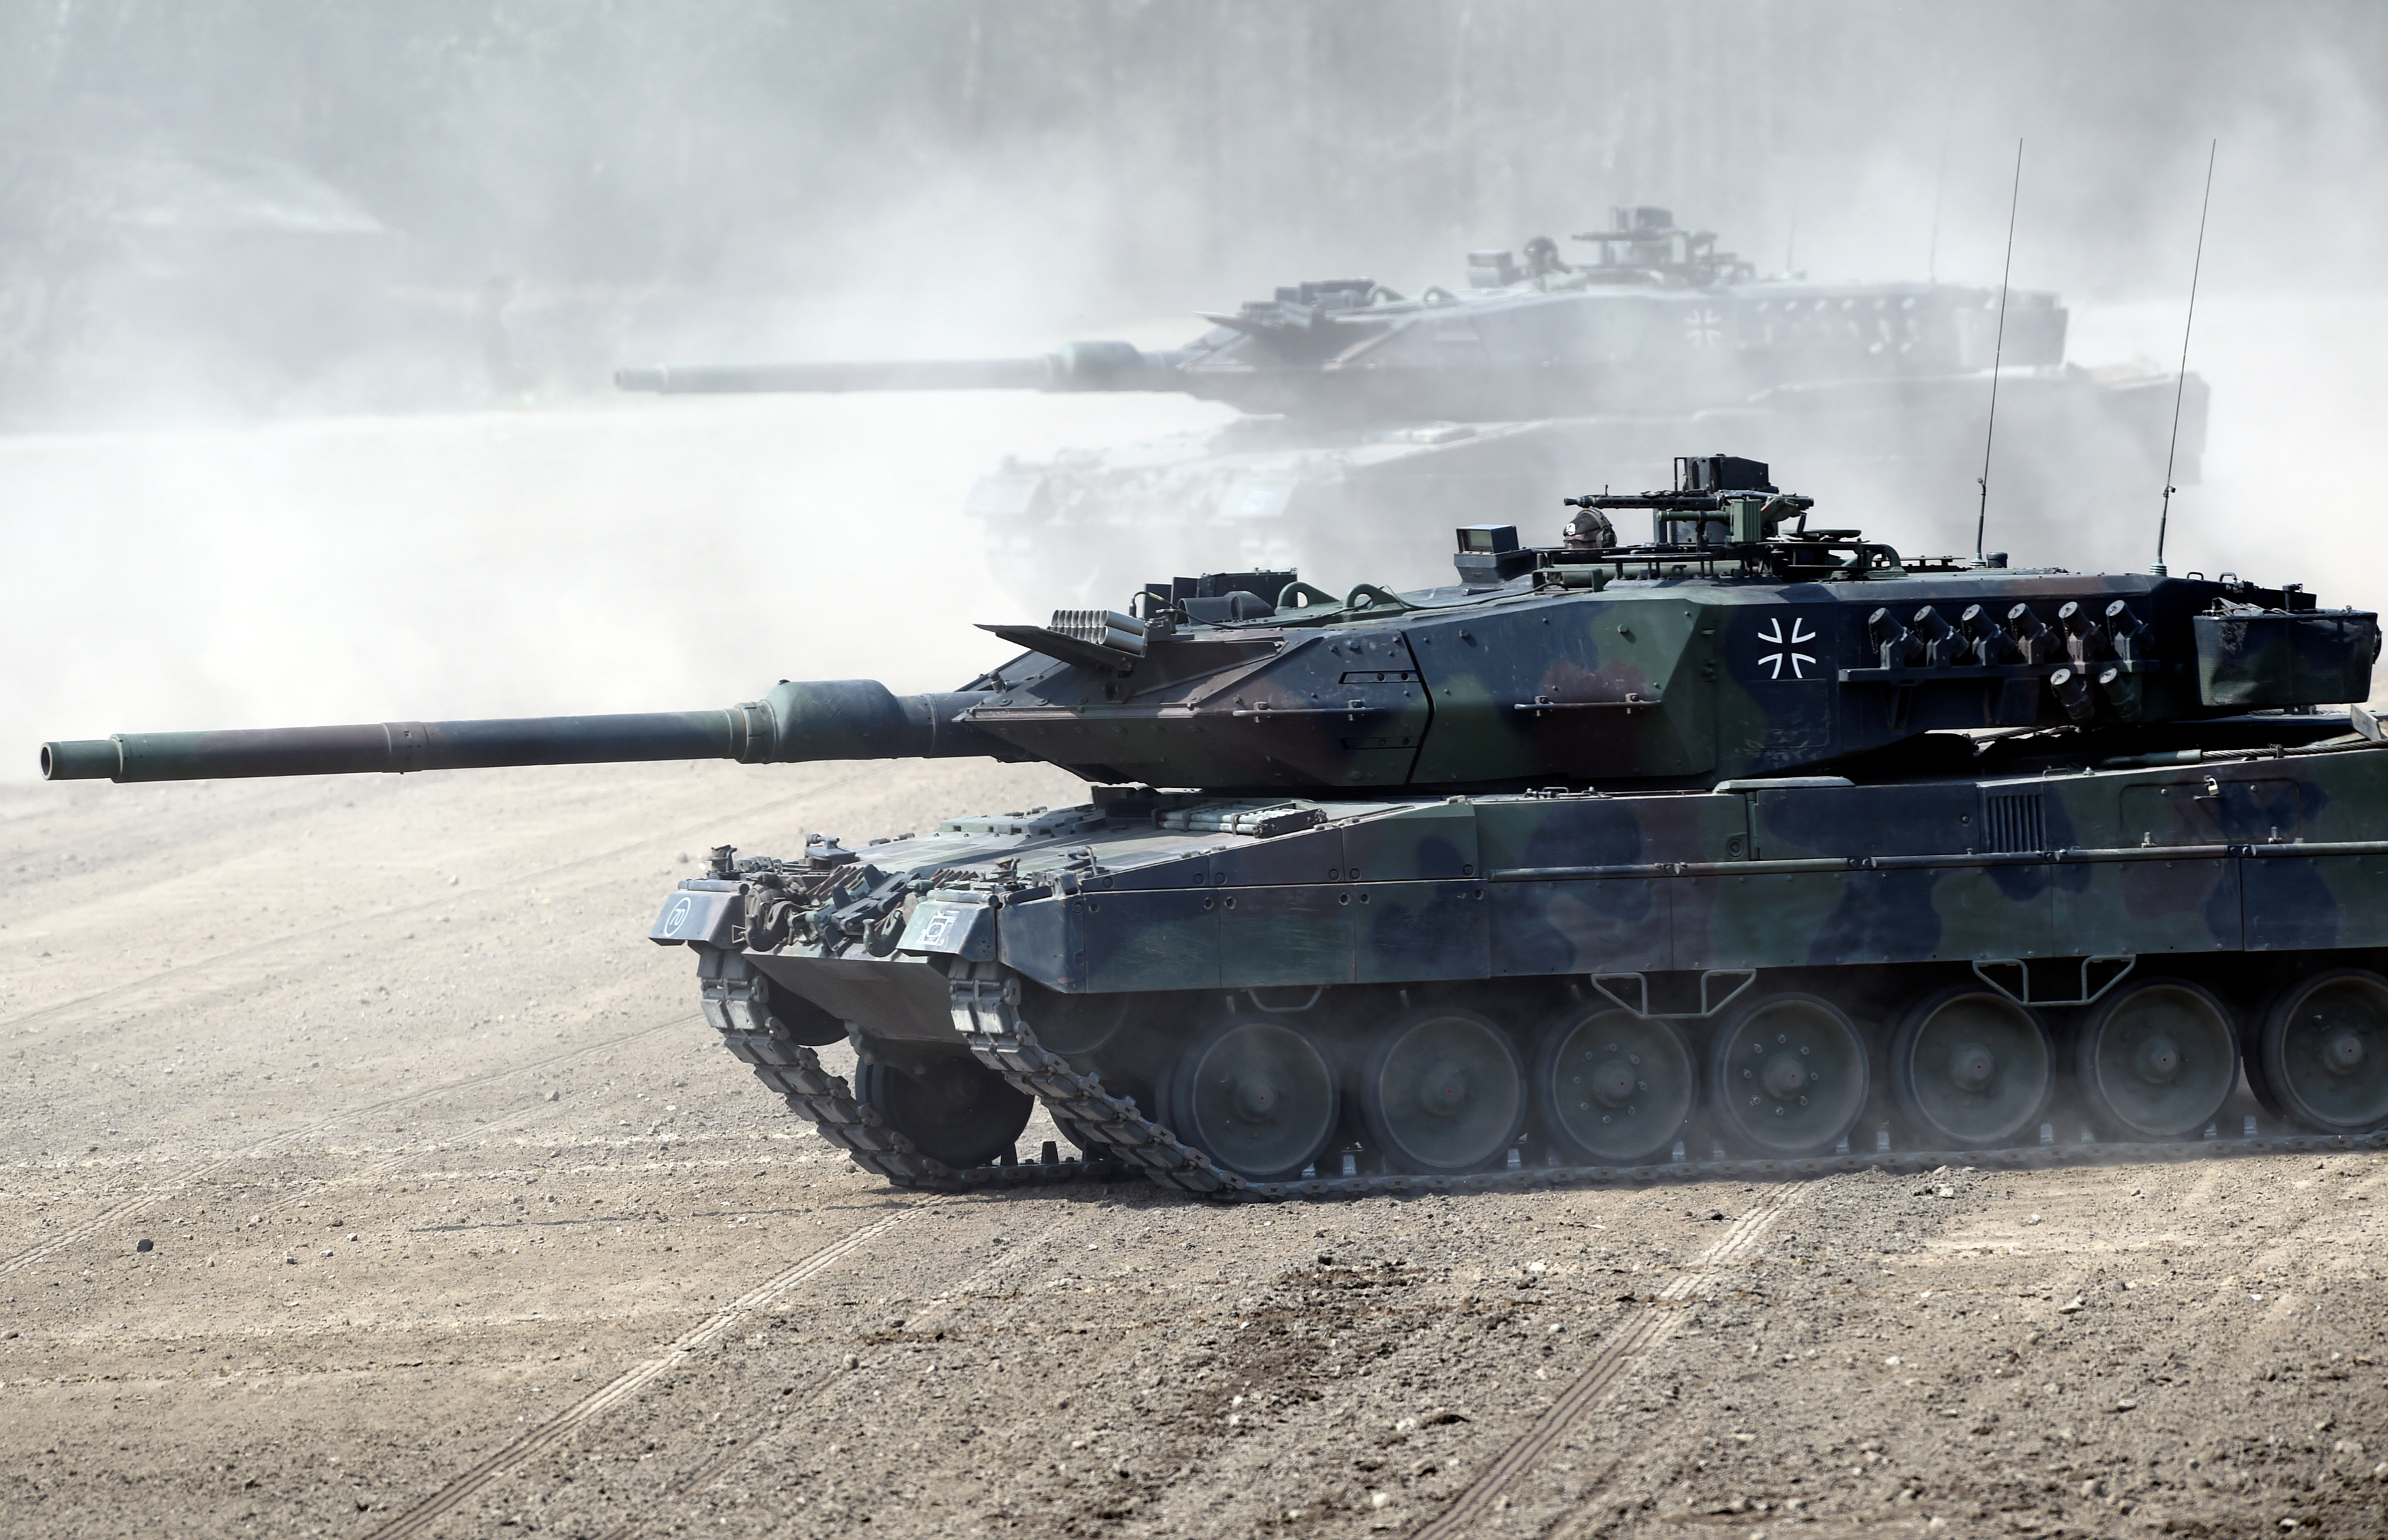 Leopard 2 tanks take position during a visit of German Chancellor Angela Merkel at NATO new spearhead force "VJTF 2019" in Munster